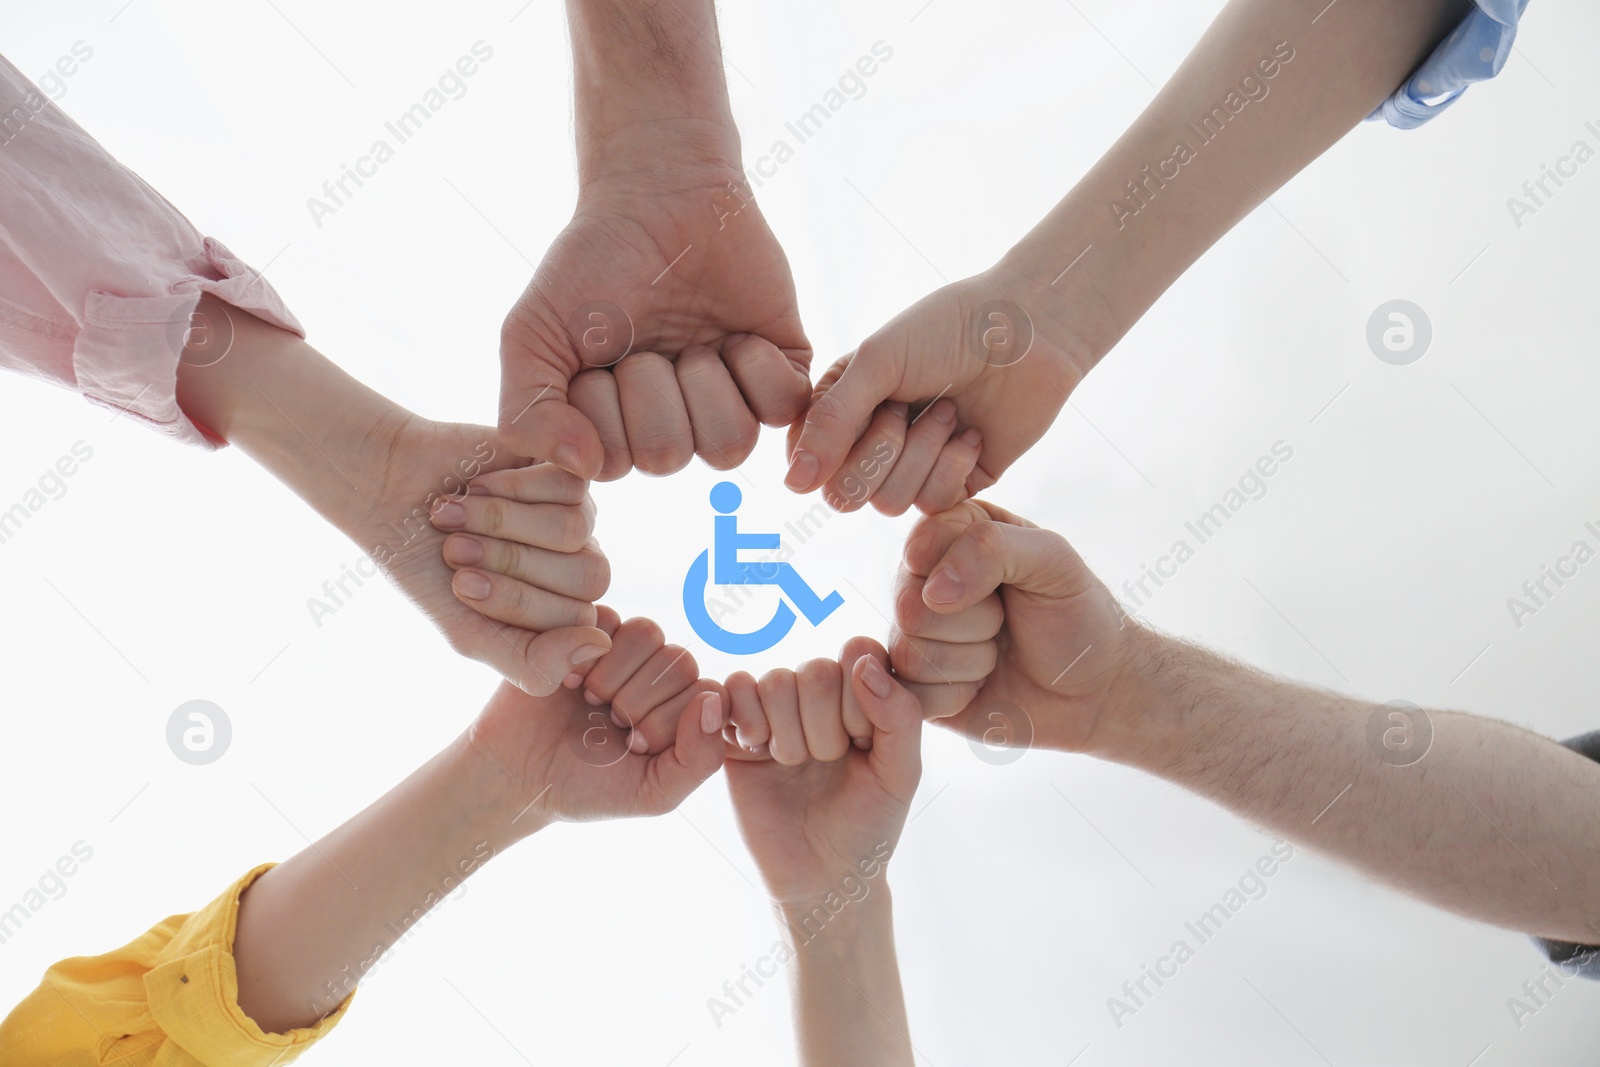 Image of Inclusion concept. People holding fists together around international symbol of access together, bottom view